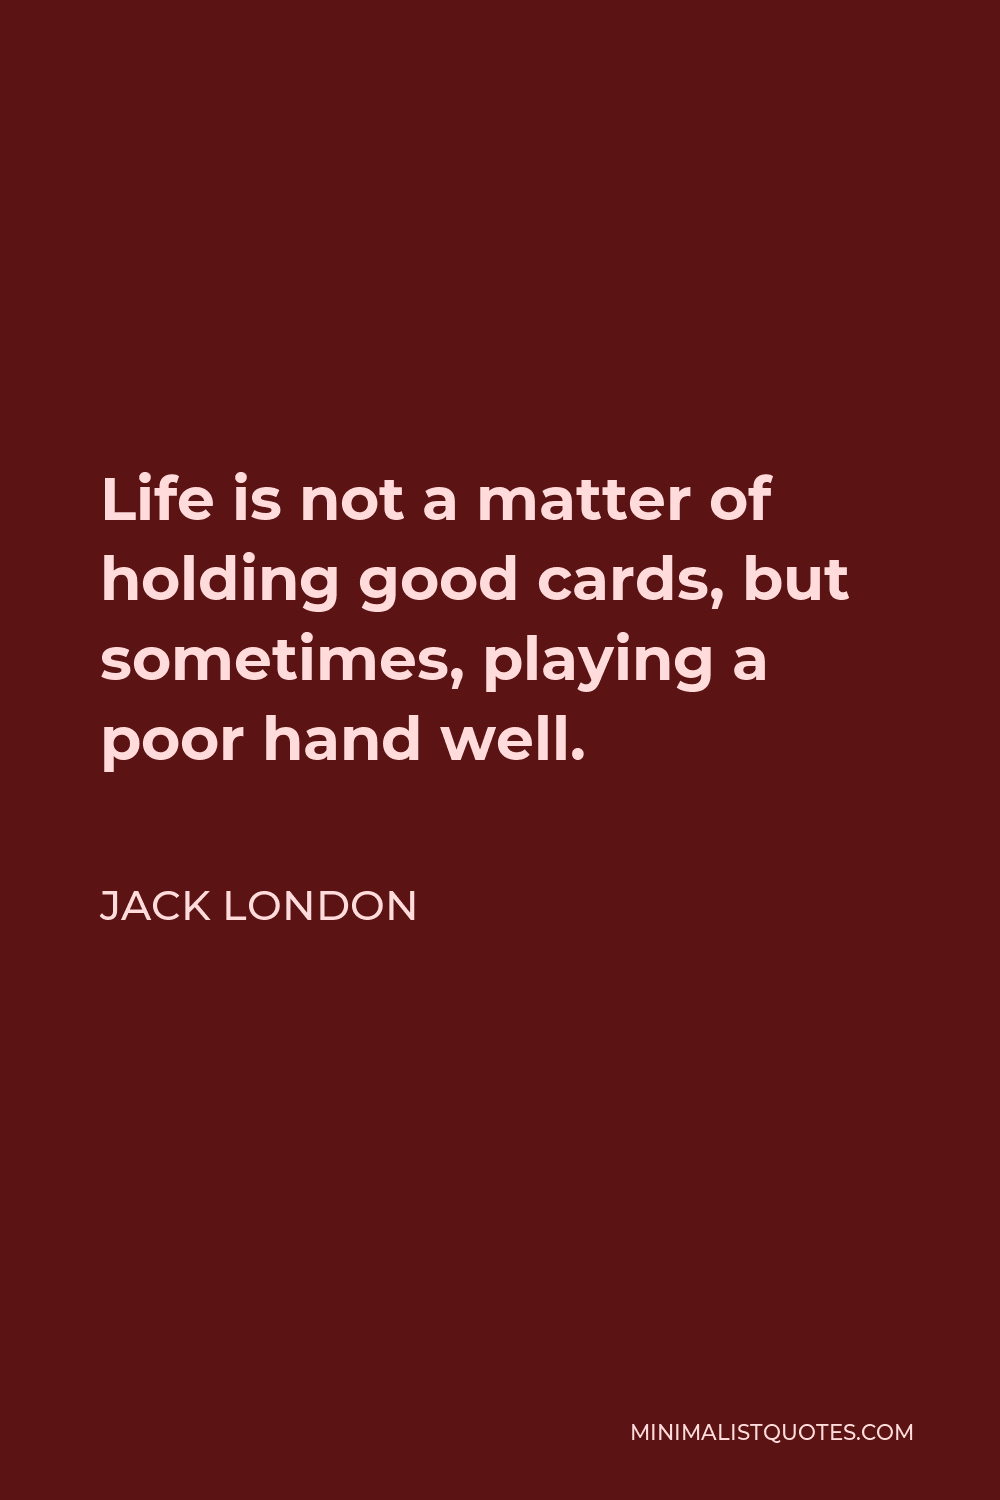 Jack London Quote: Life is not a matter of holding good cards, but ...